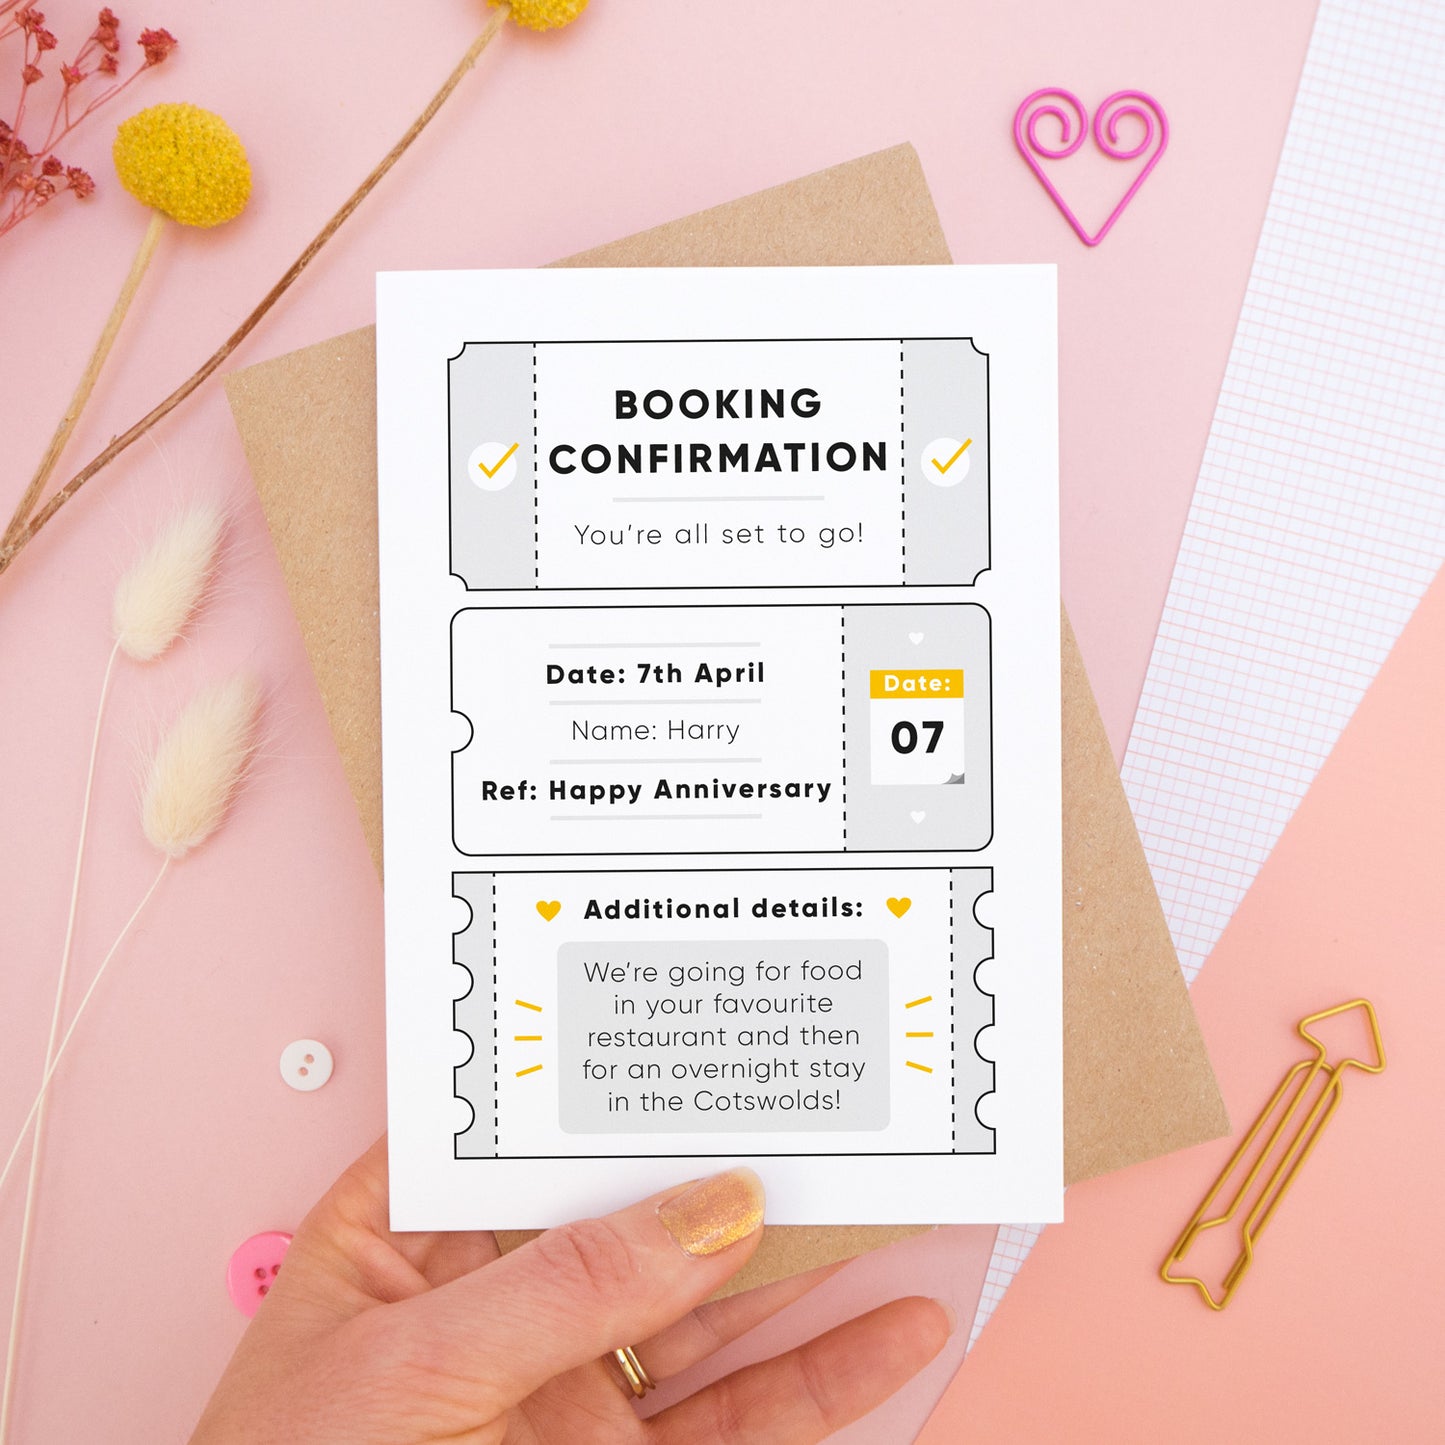 A personalised anniversary booking confirmation gift card held in front of a pink background scattered with dry flowers, grid paper, buttons and a heart. Pictured is the grey version of the card on top of a kraft brown envelope.